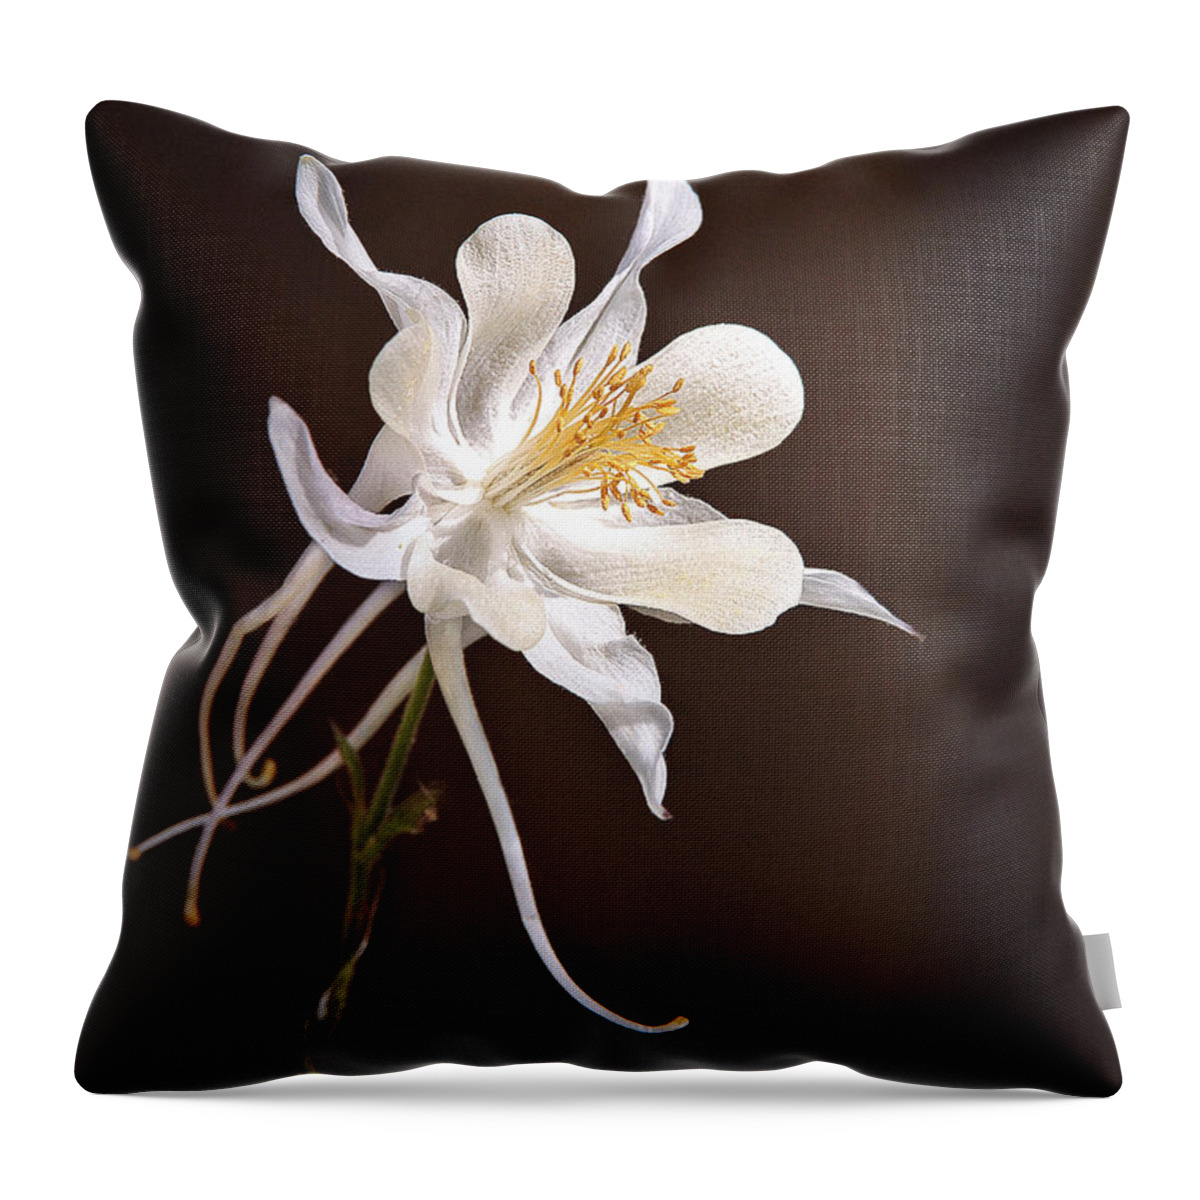 Columbine Throw Pillow featuring the photograph White Columbine by James Steele